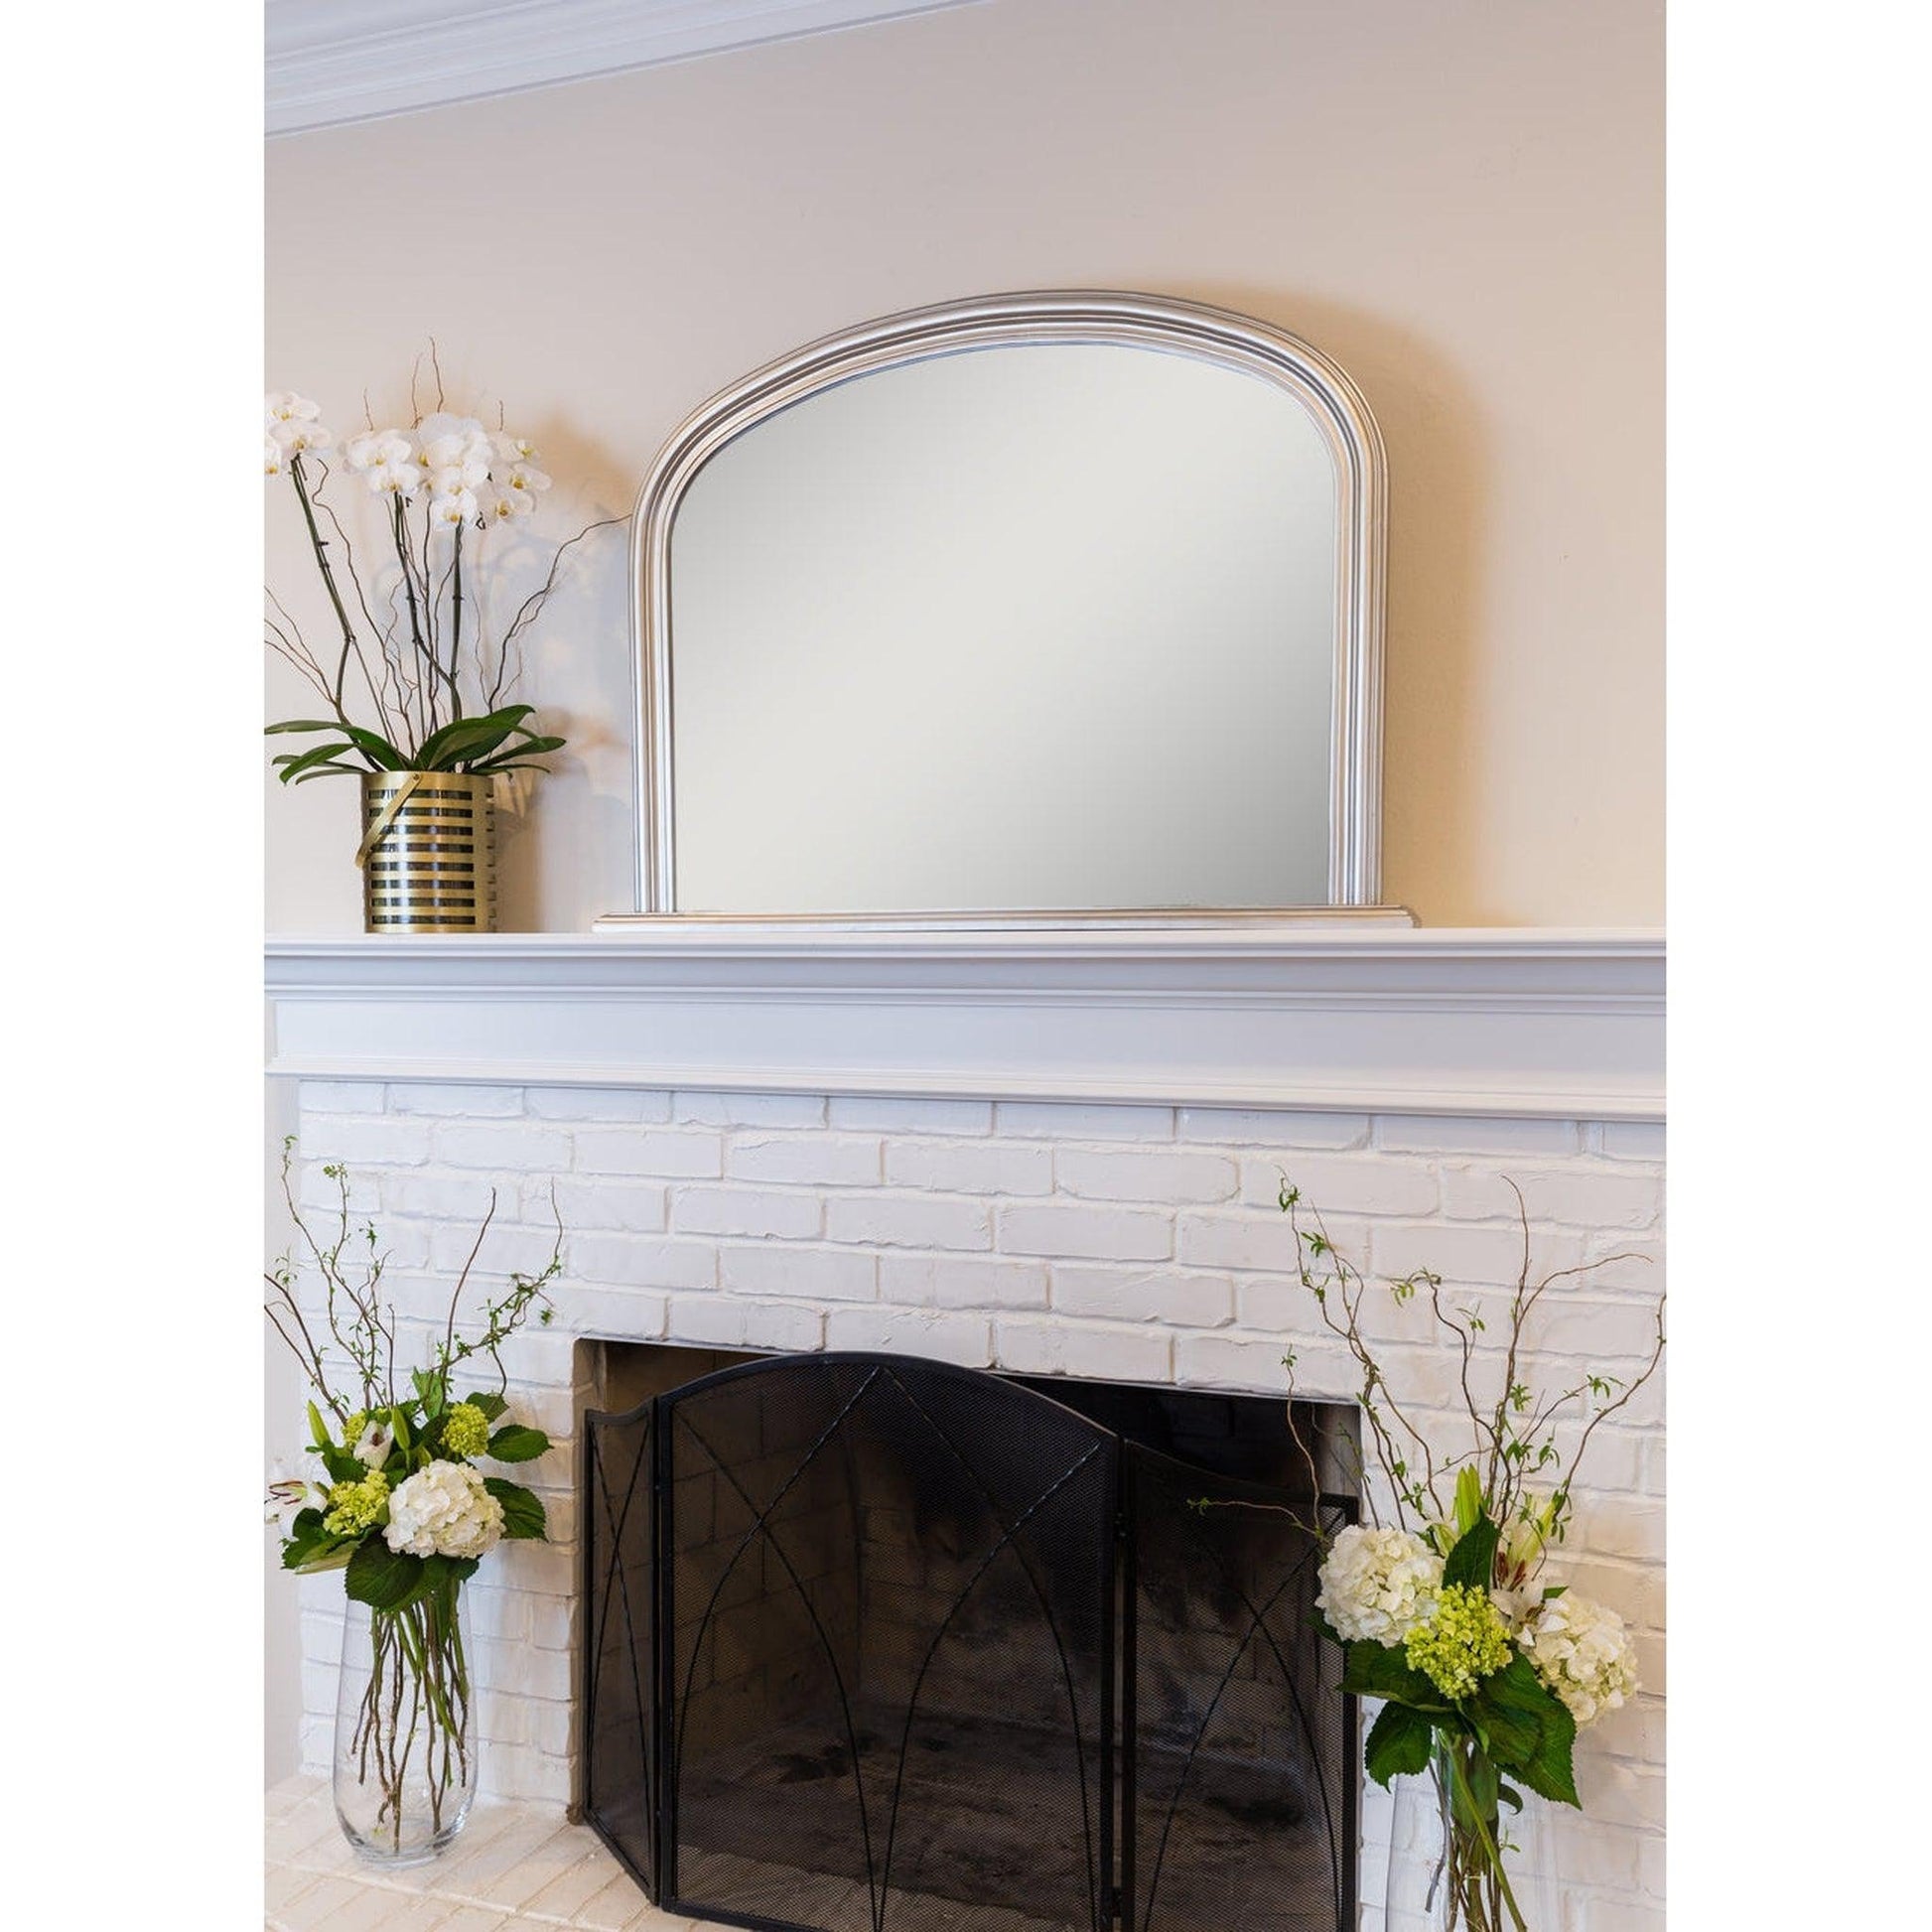 SBC Decor Lyon 31" x 47" Wall-Mounted Arched Wood Frame Dresser Wall Mirror In Brushed Silver Finish